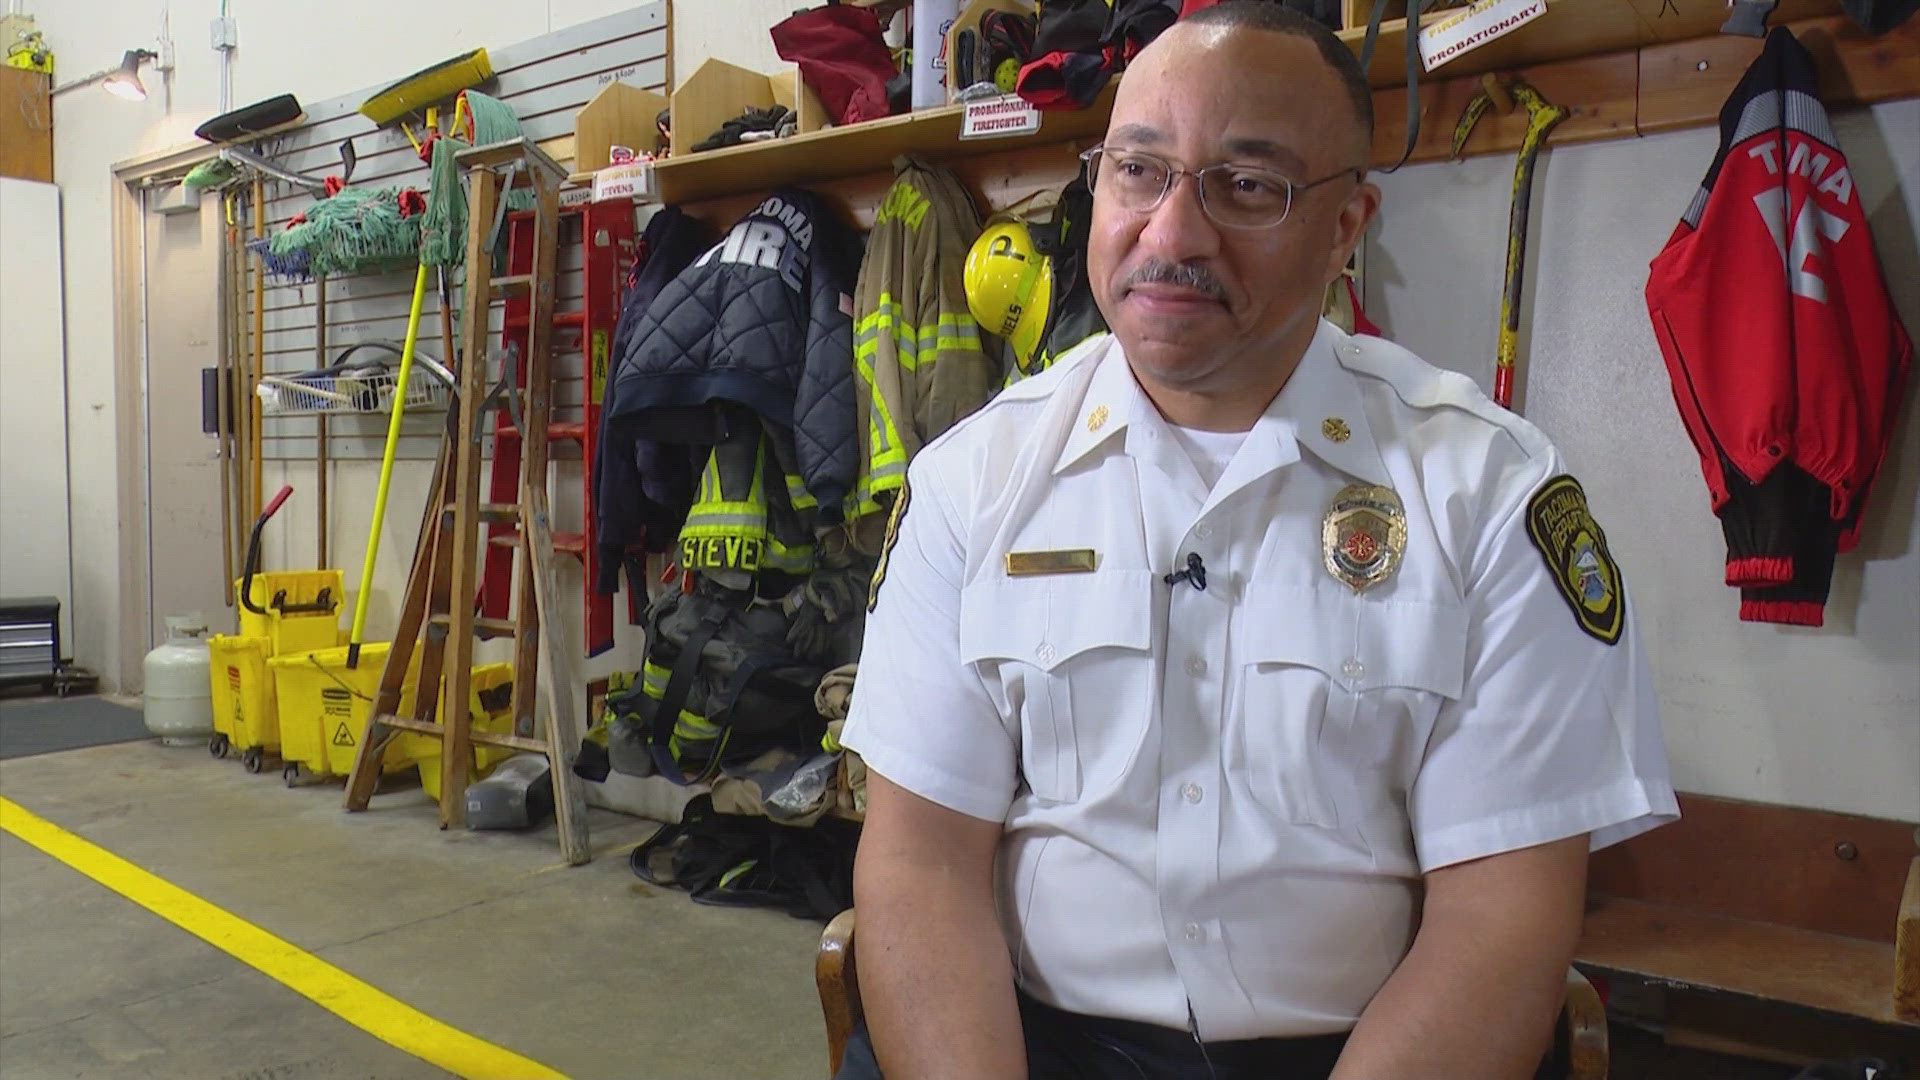 Former Chief Tory Green sat down with KING 5 to reflect on his career, share the change he has seen, and reflect on some of the challenges facing the department.